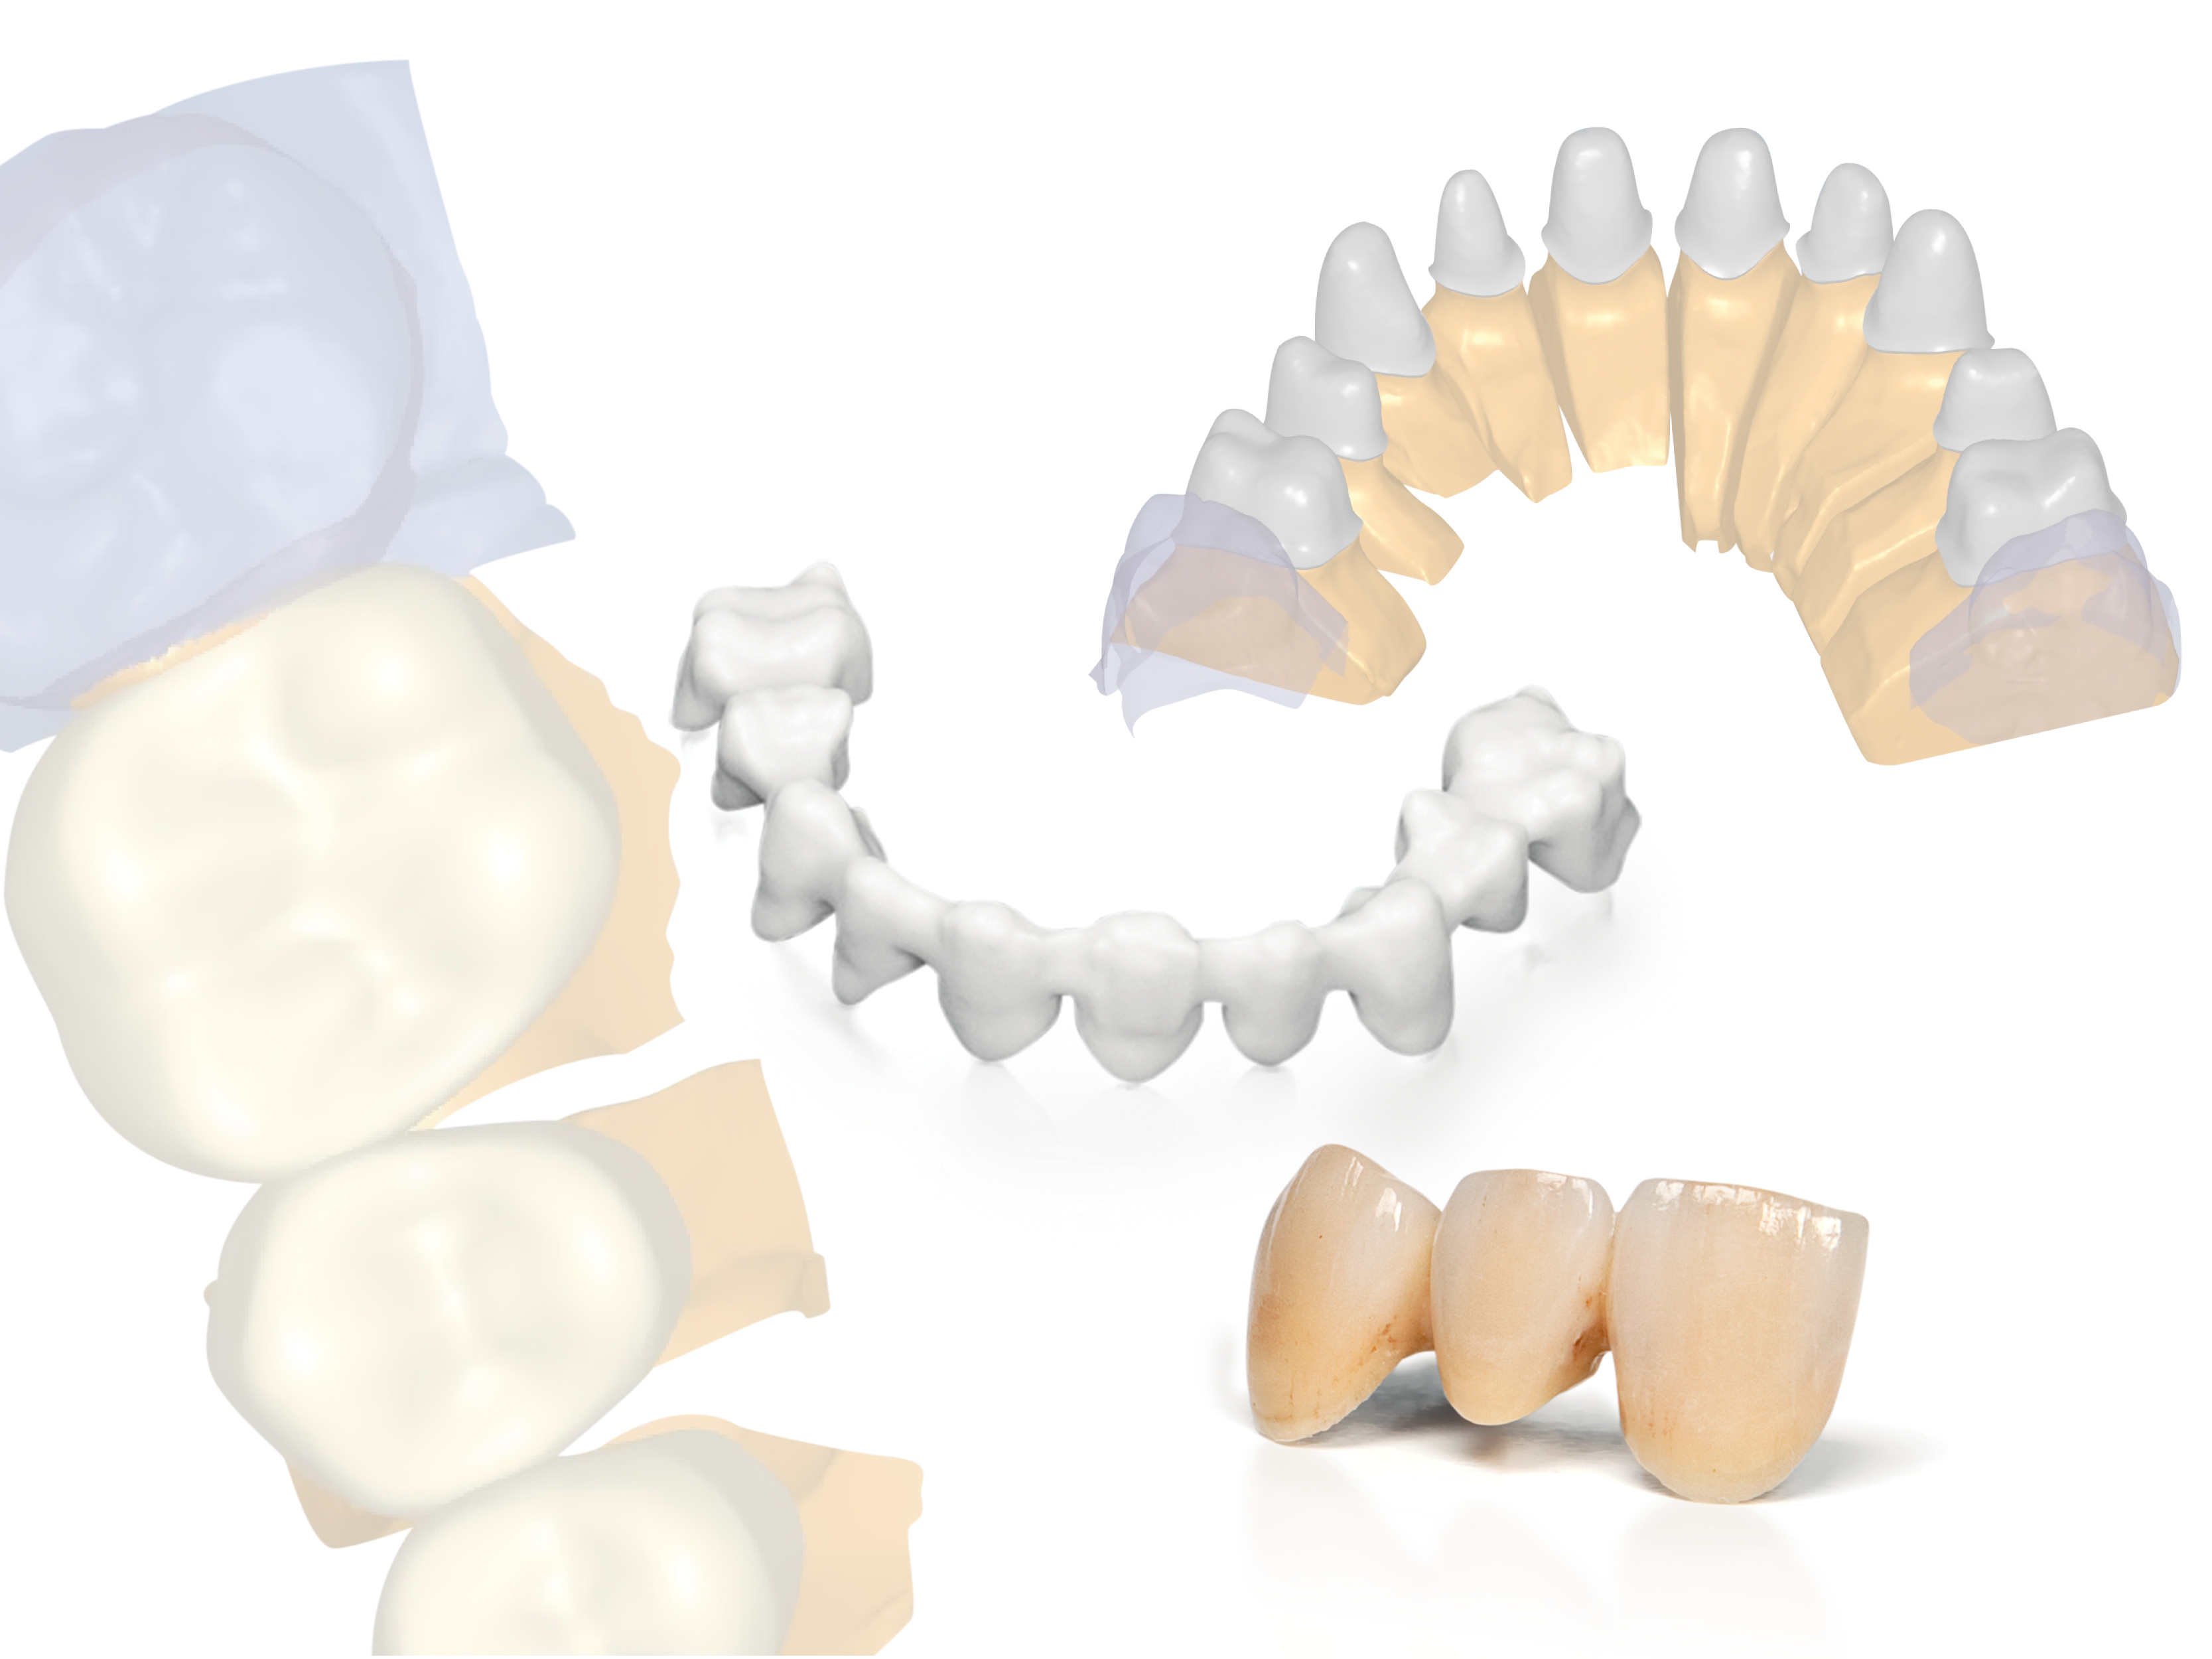 New open CAD/CAM solutions for dentists and dental laboratories from Planmeca